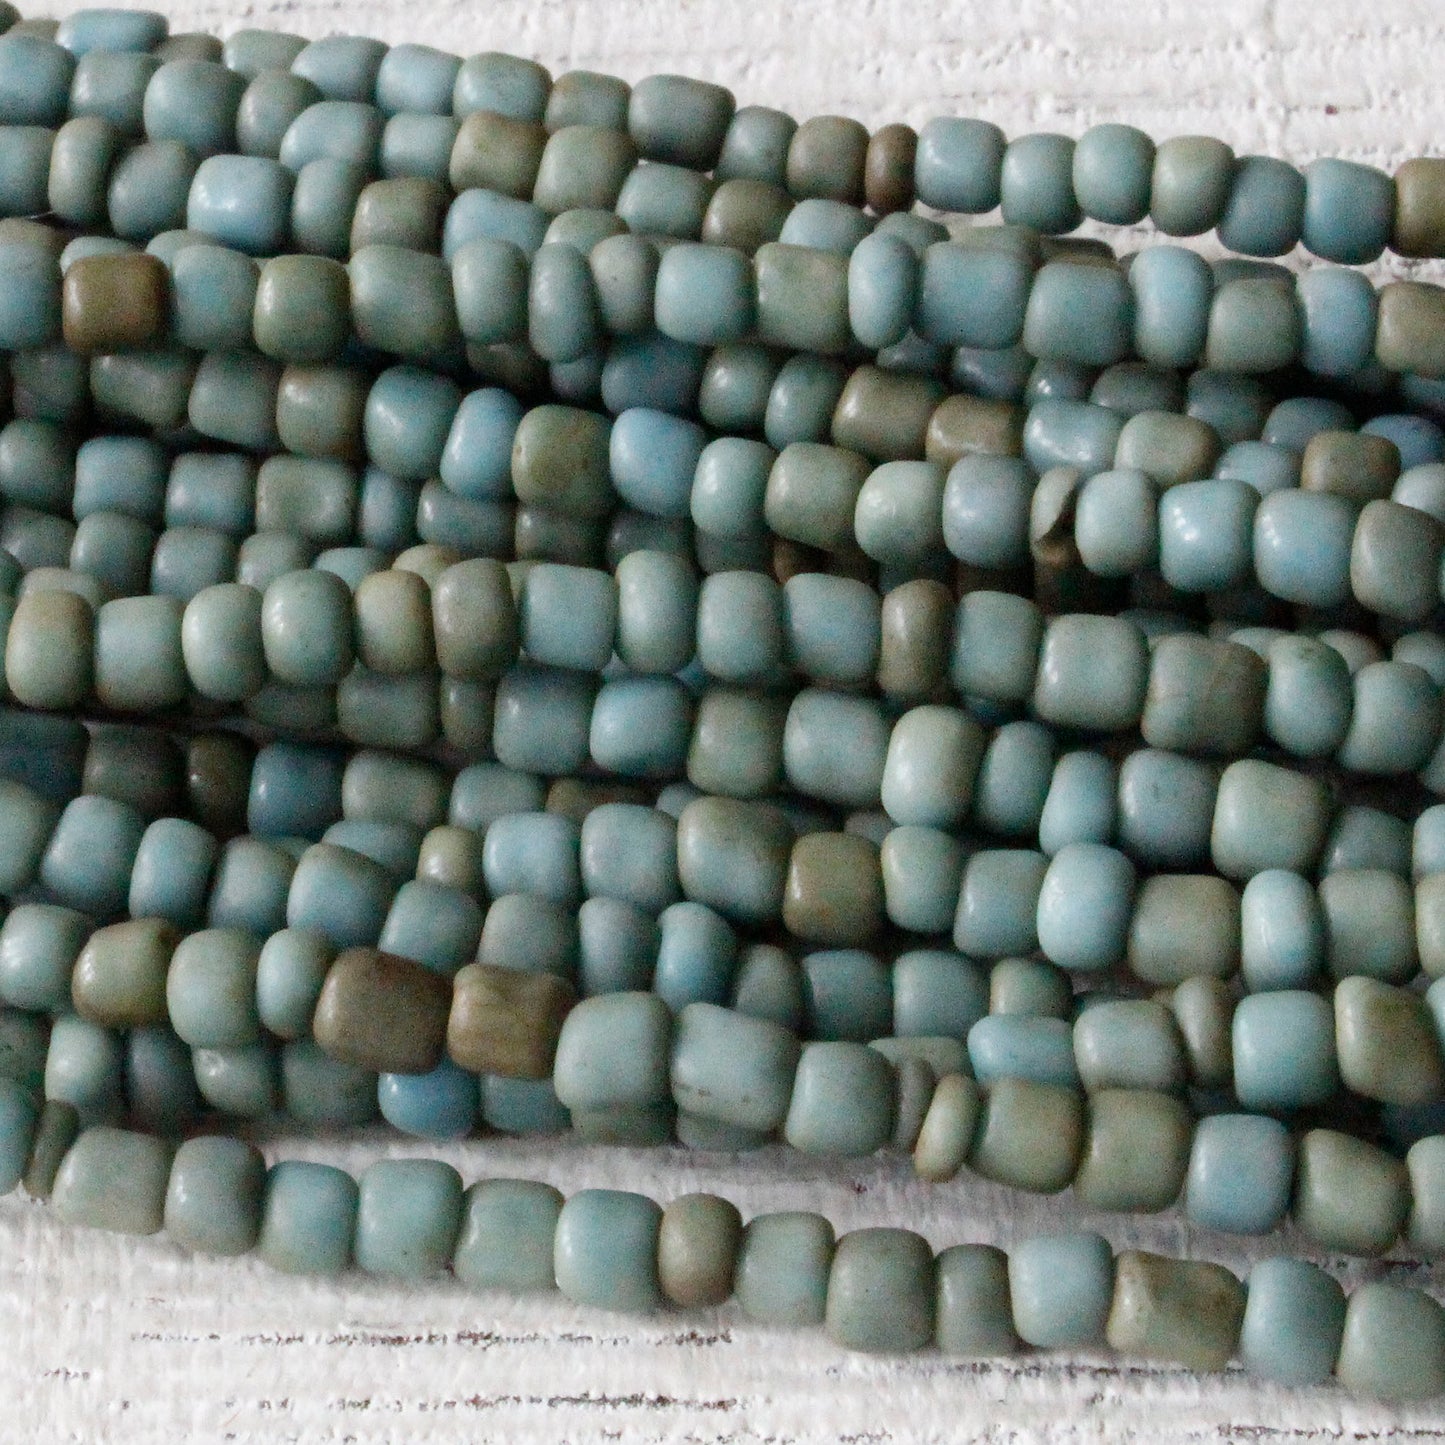 Rustic Indonesian Seed Beads - Teal - 42 inches